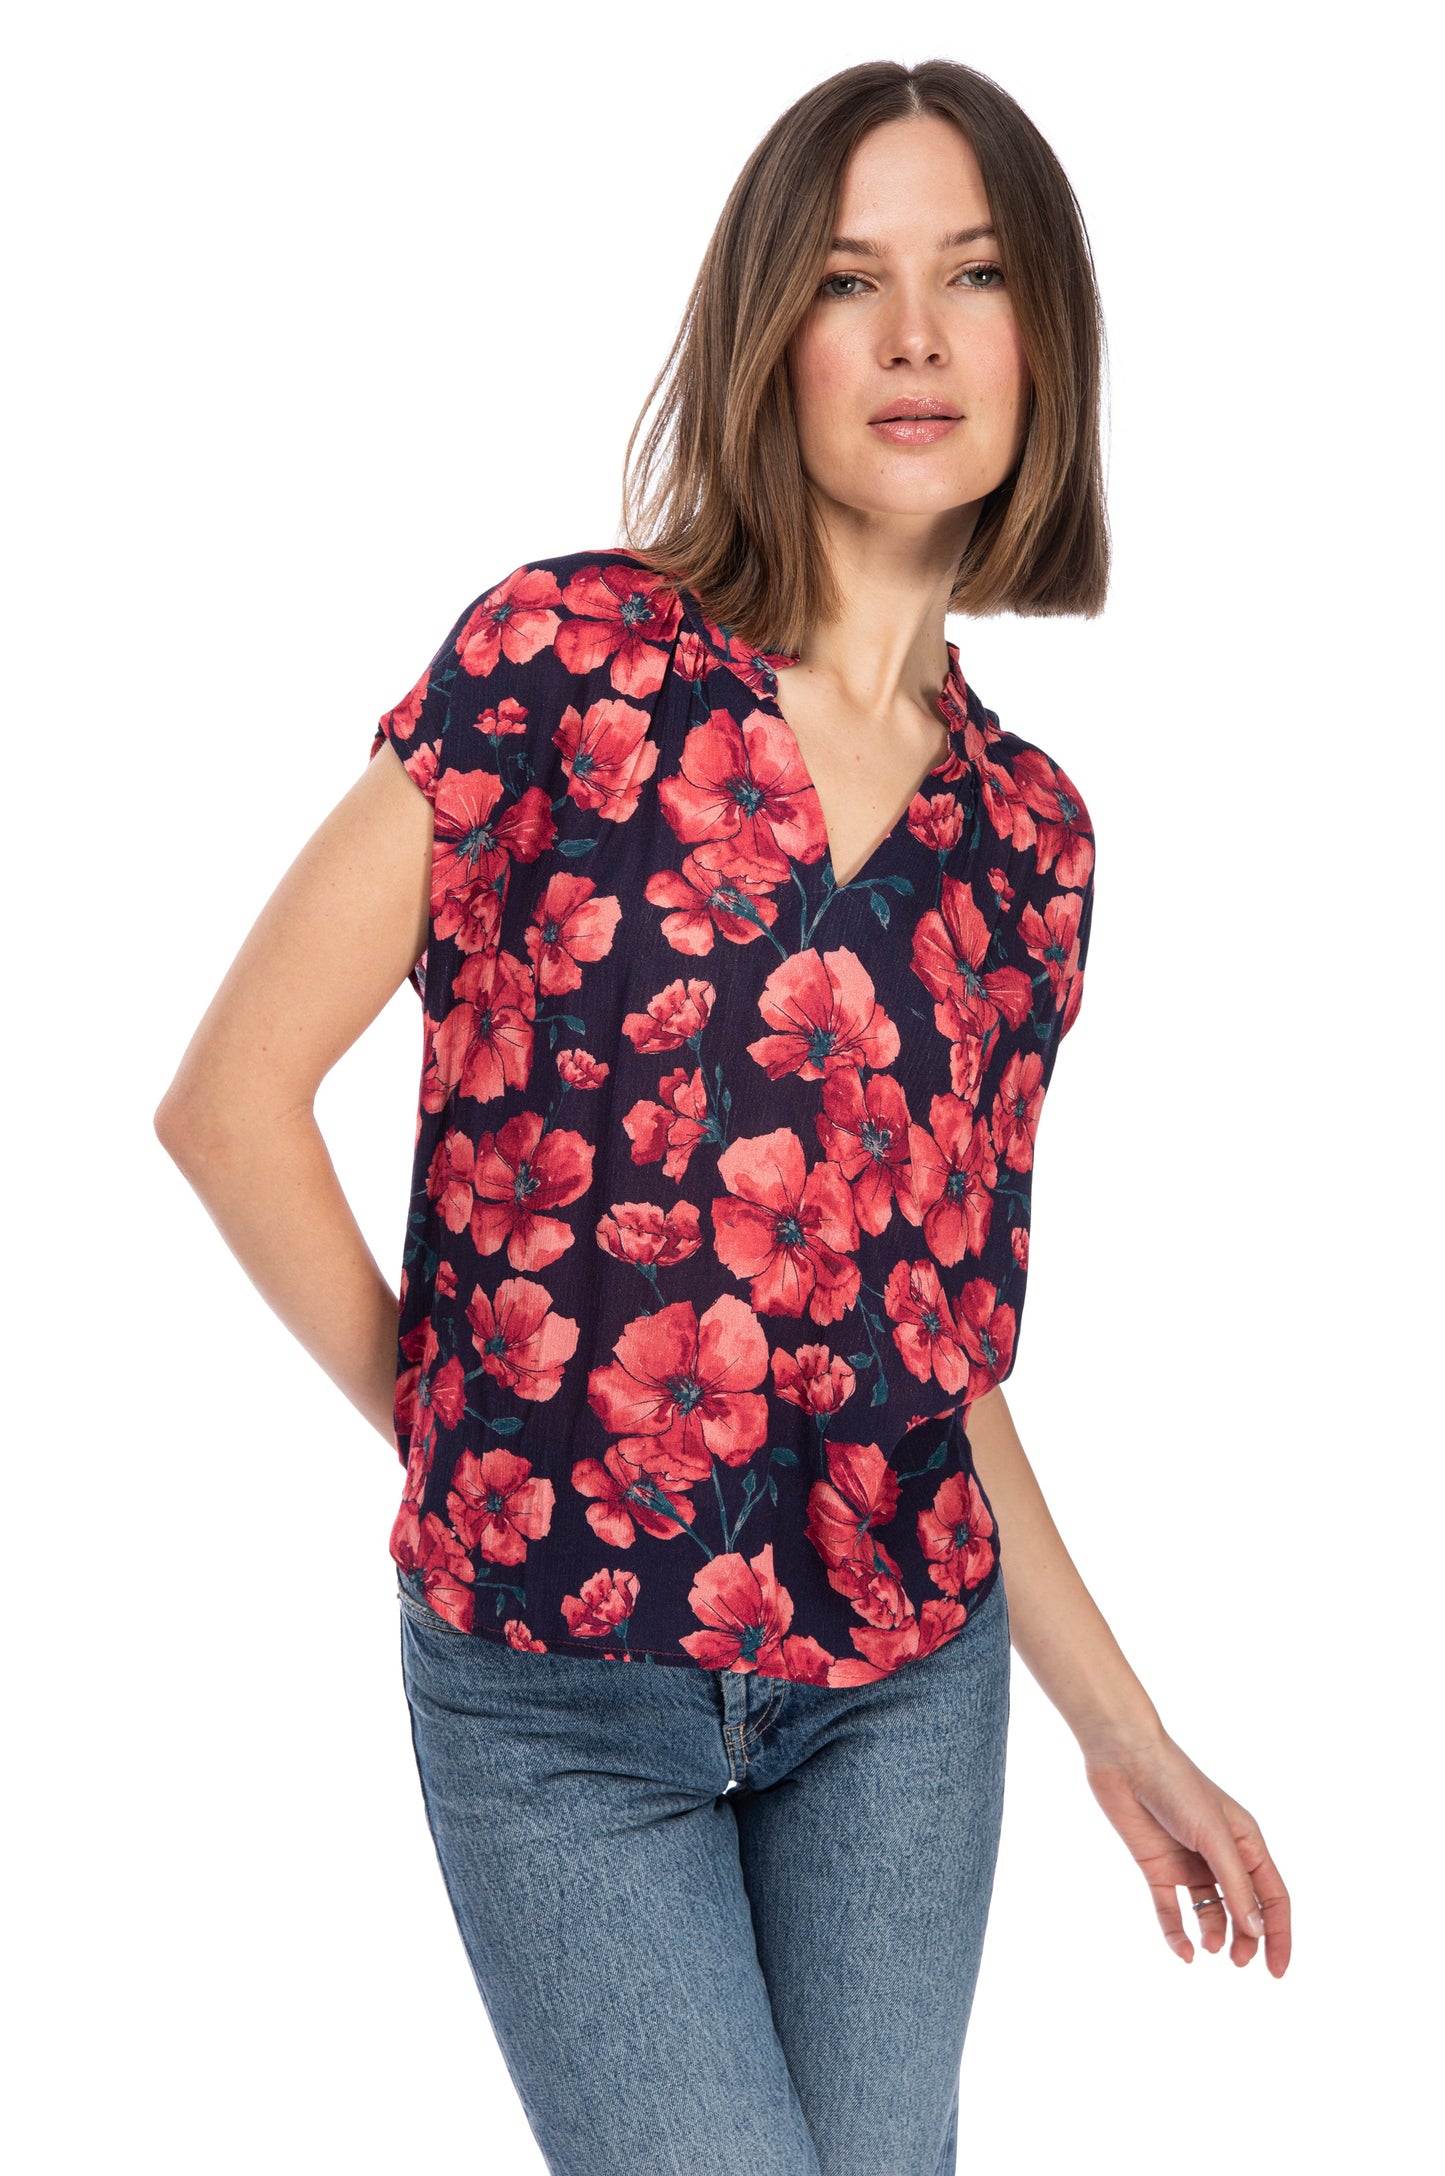 Woman posing in a B Collection by Bobeau 100% Rayon floral ruffle neck top and blue jeans against a white background.